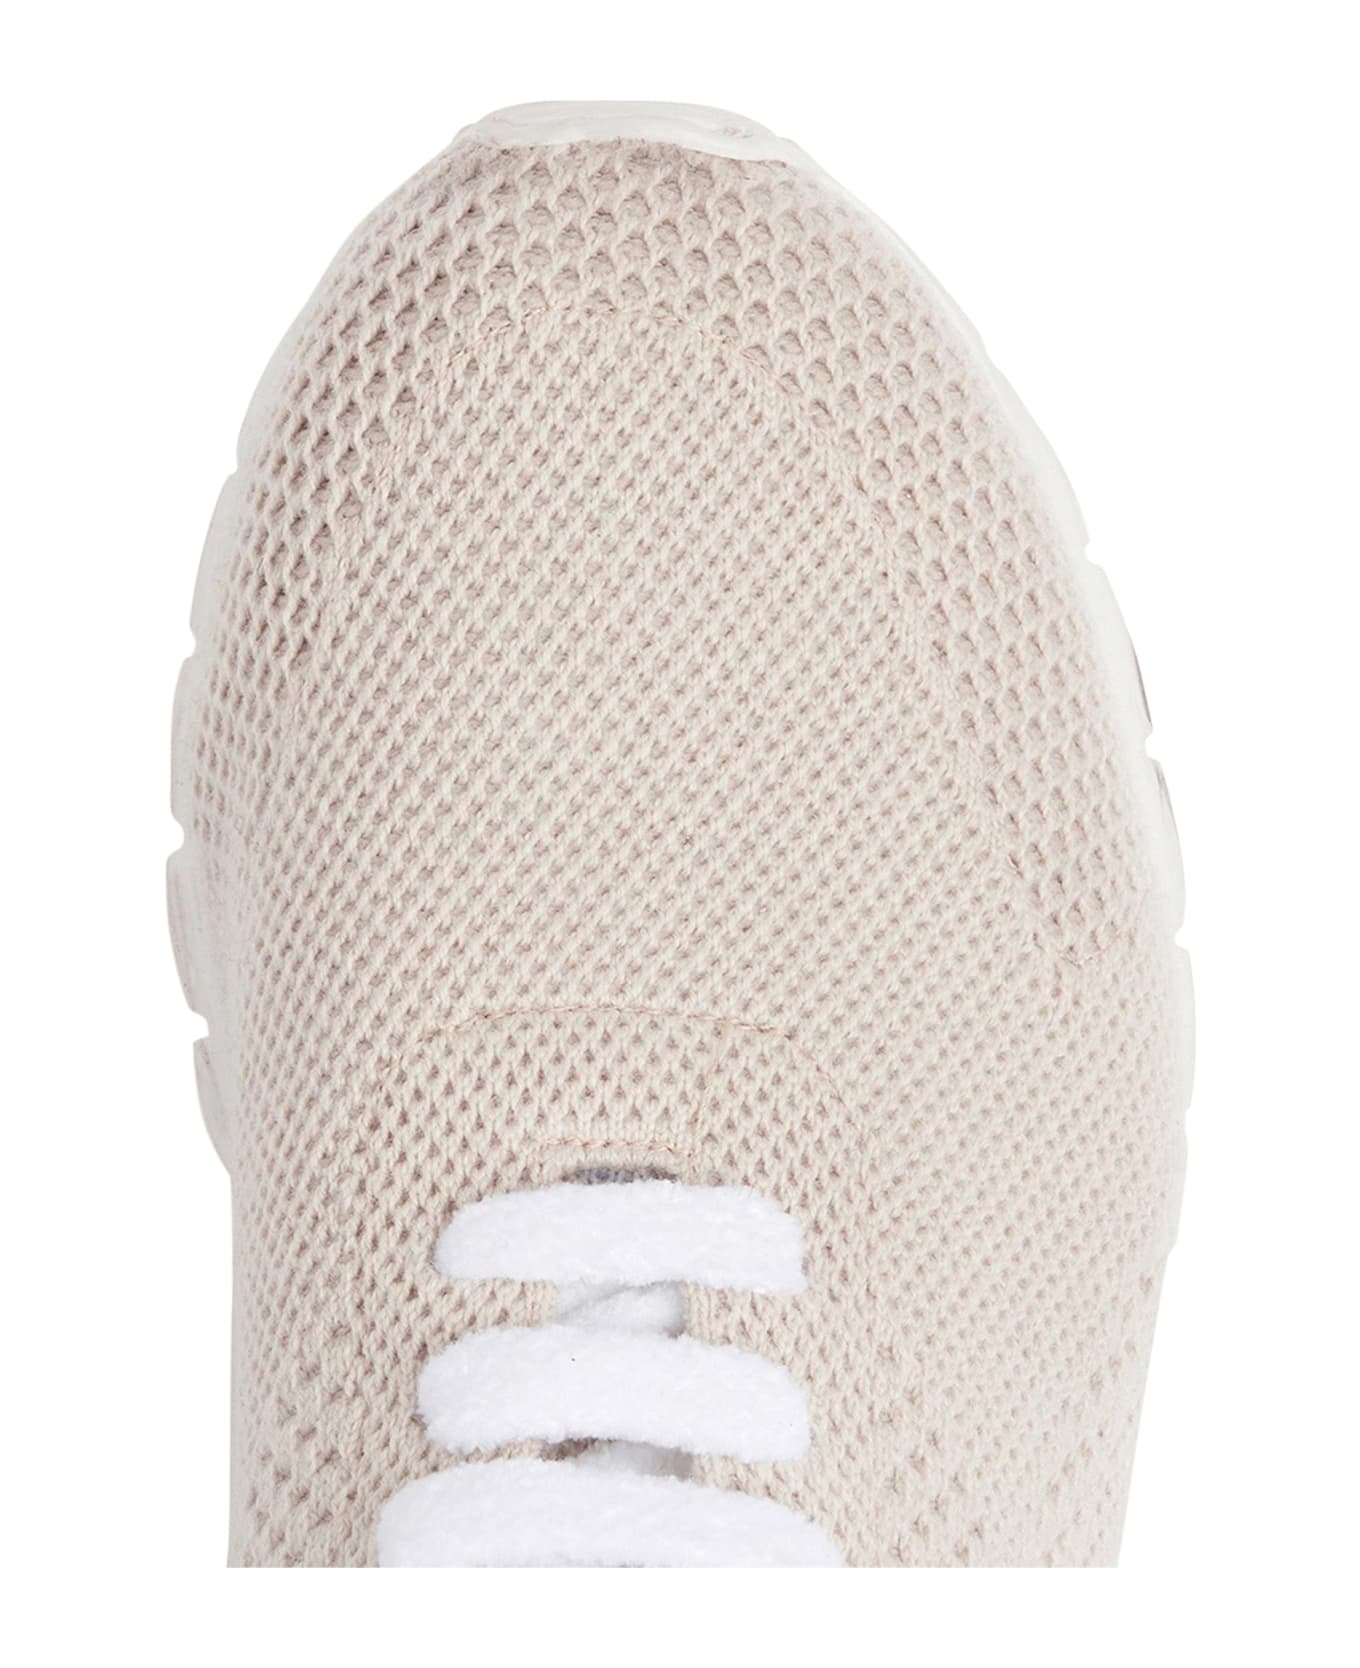 Kiton Sneakers Shoes Cashmere - BEIGE